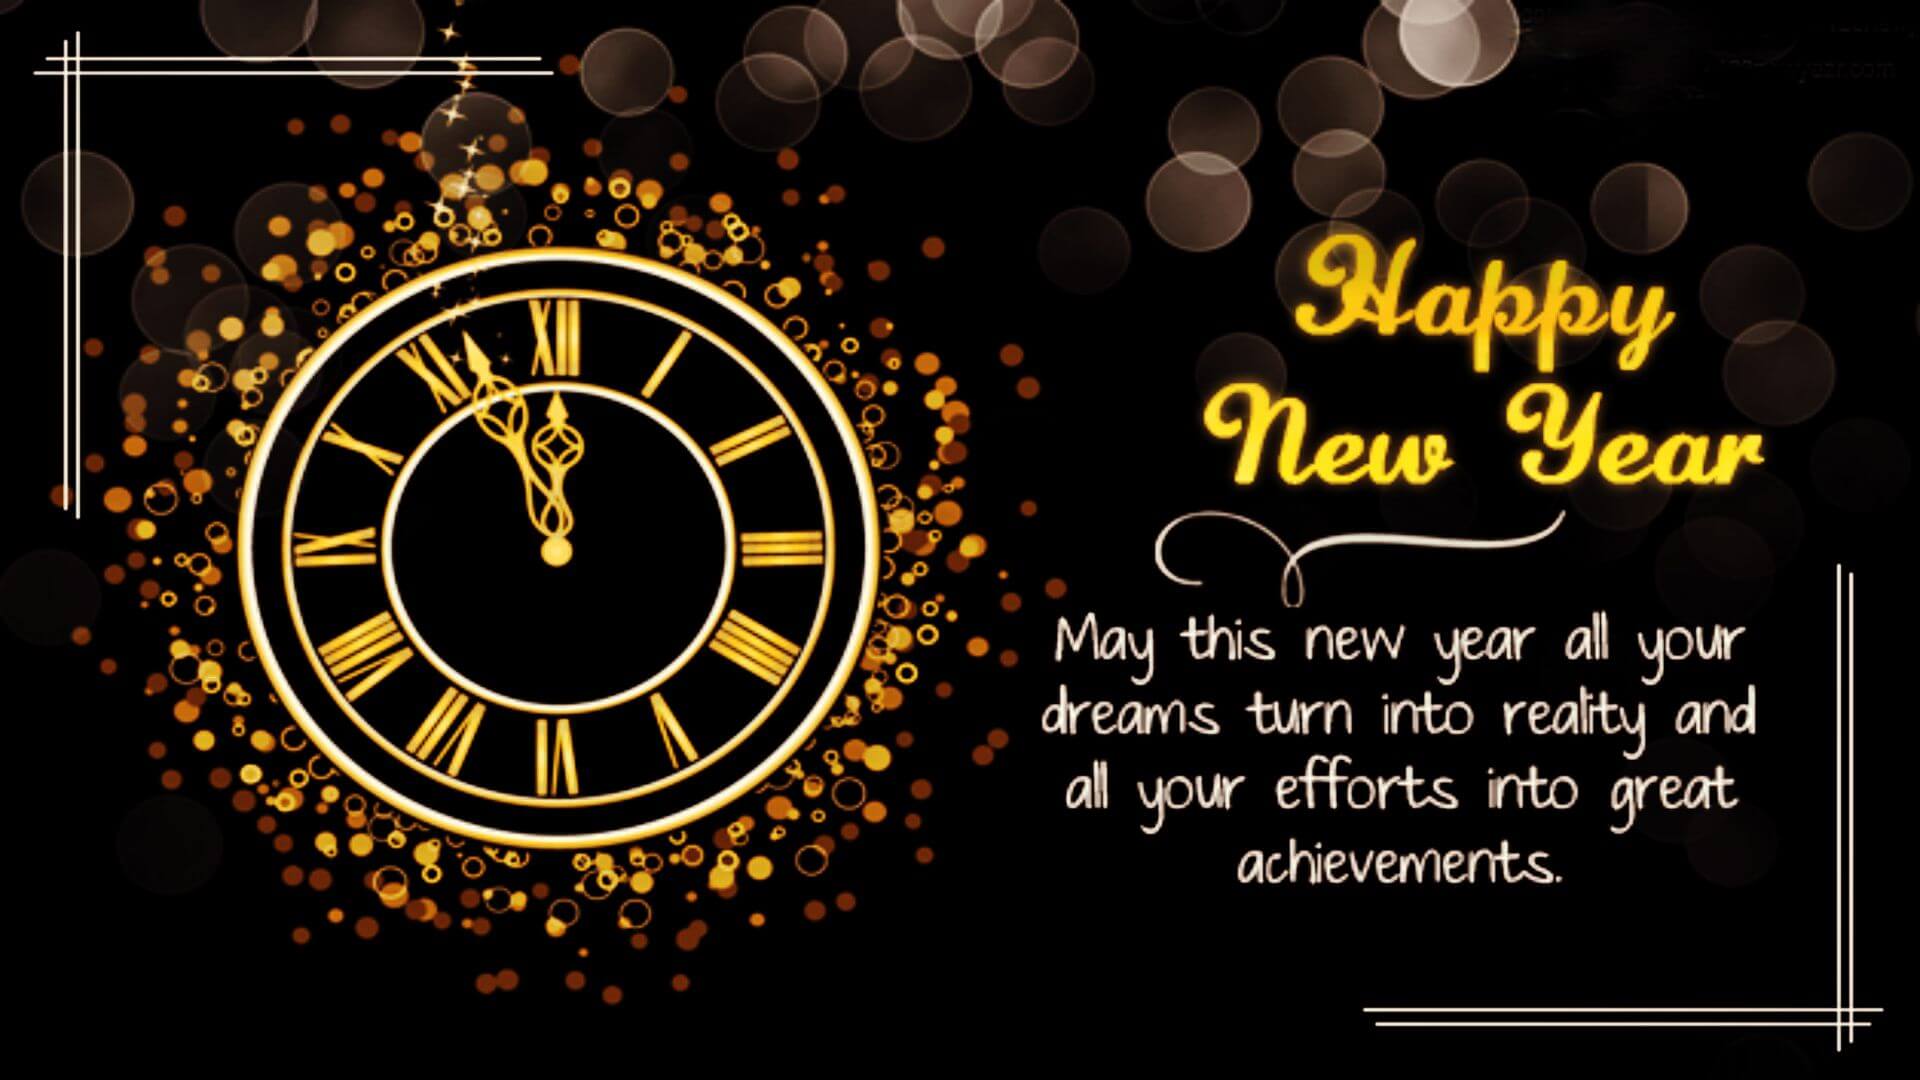 Happy New Year 2023 Image With Quotes